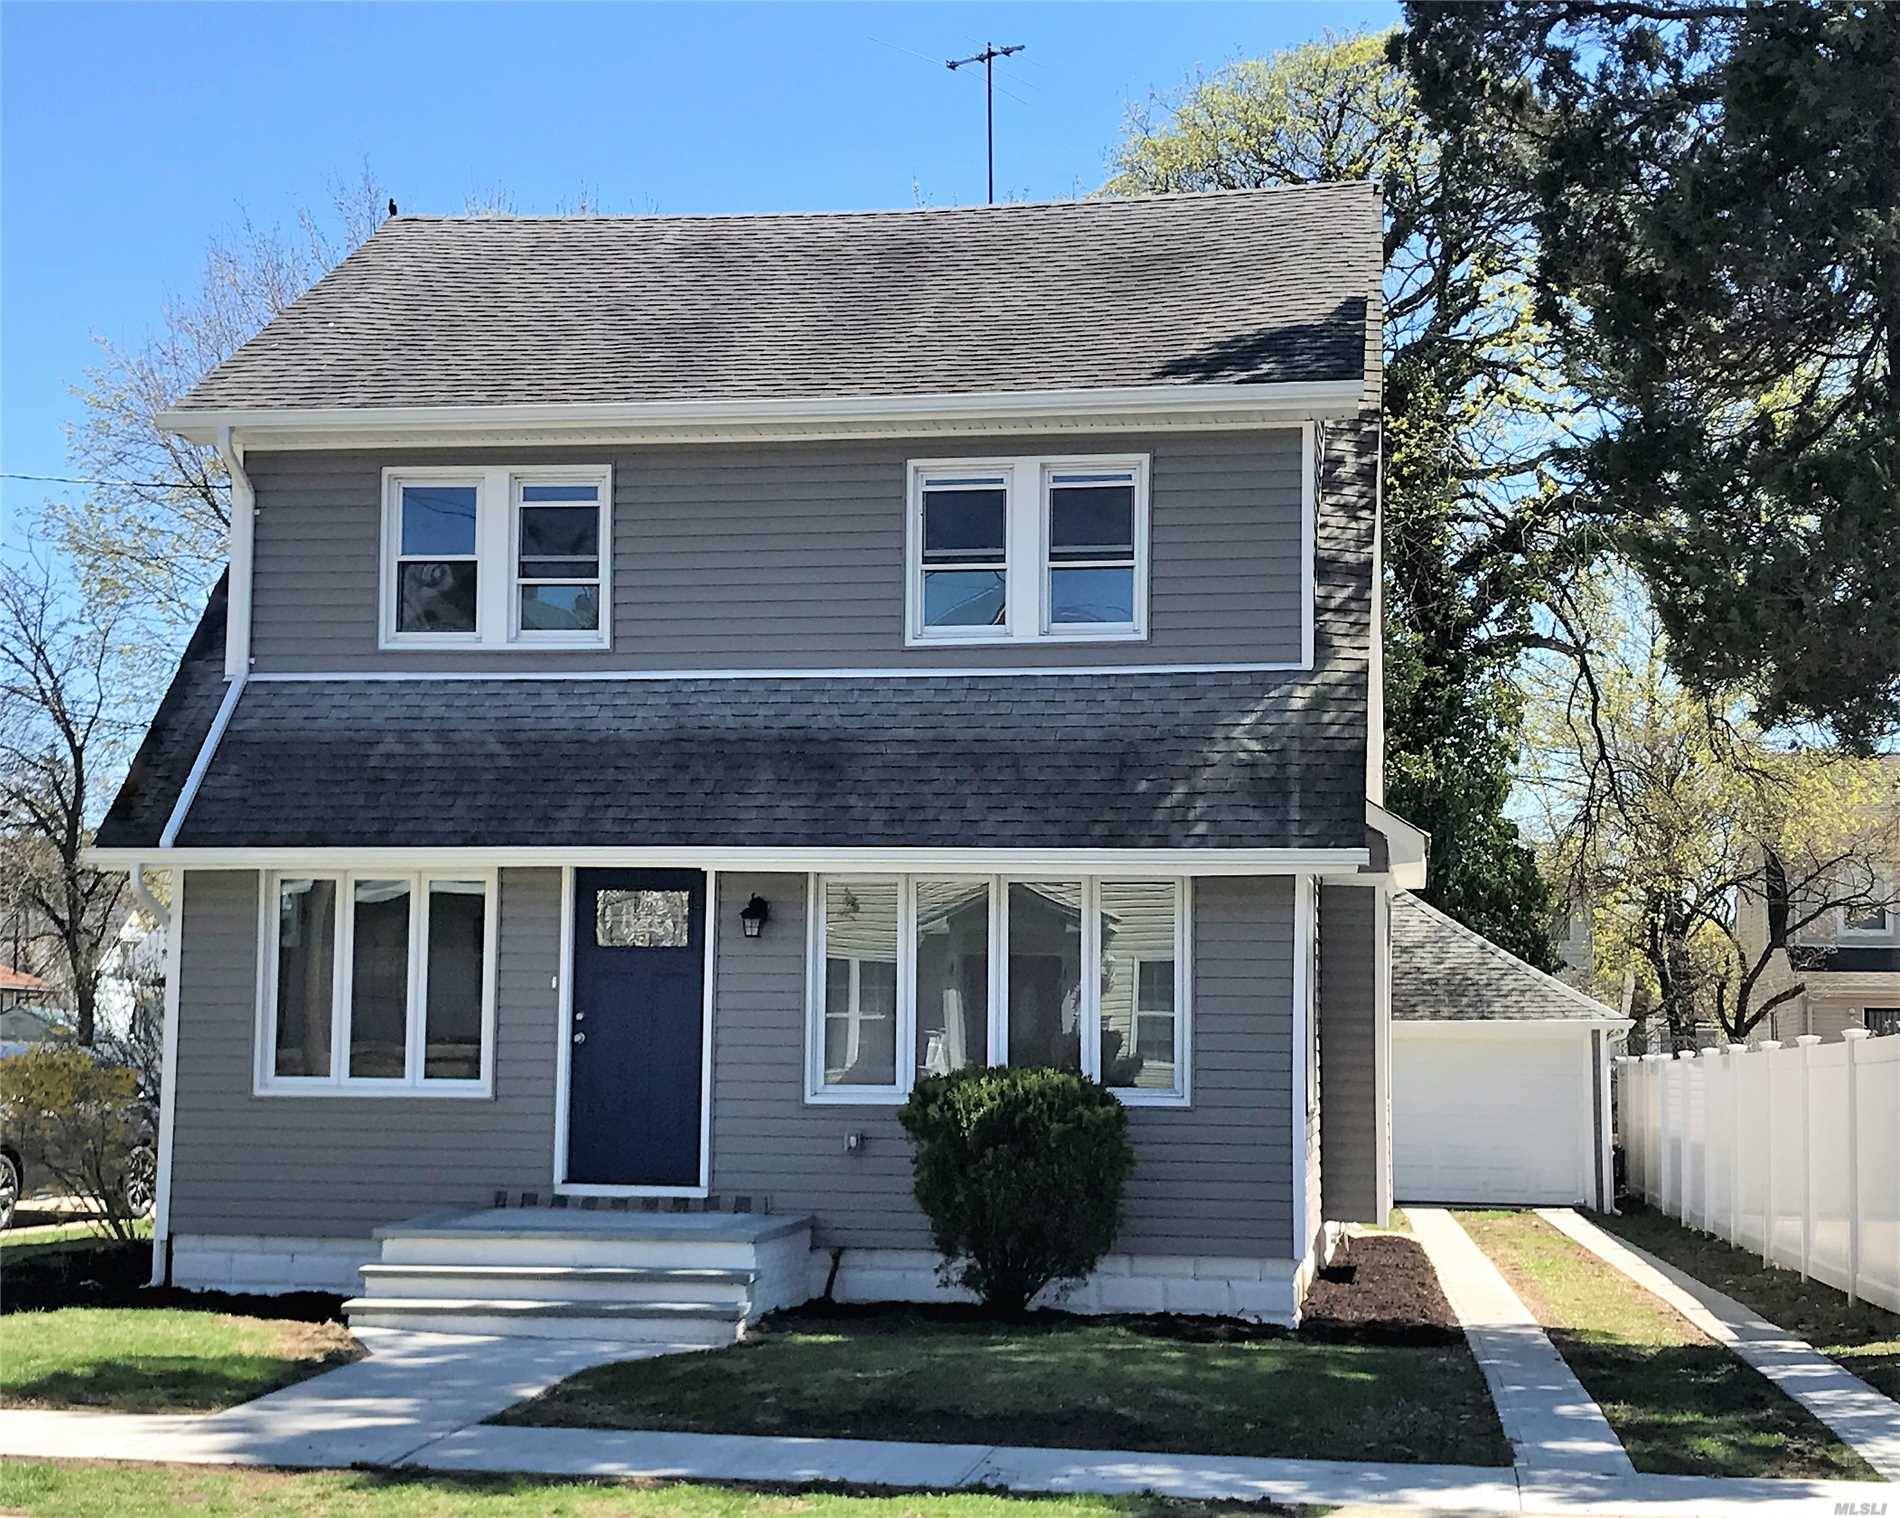 Completely renovated, 4 bedrooms, 3 full bathrooms, Open concept, hardwood floors, stainless steel appliances with quartz counter tops, fully finished basement with bonus room and OSE.